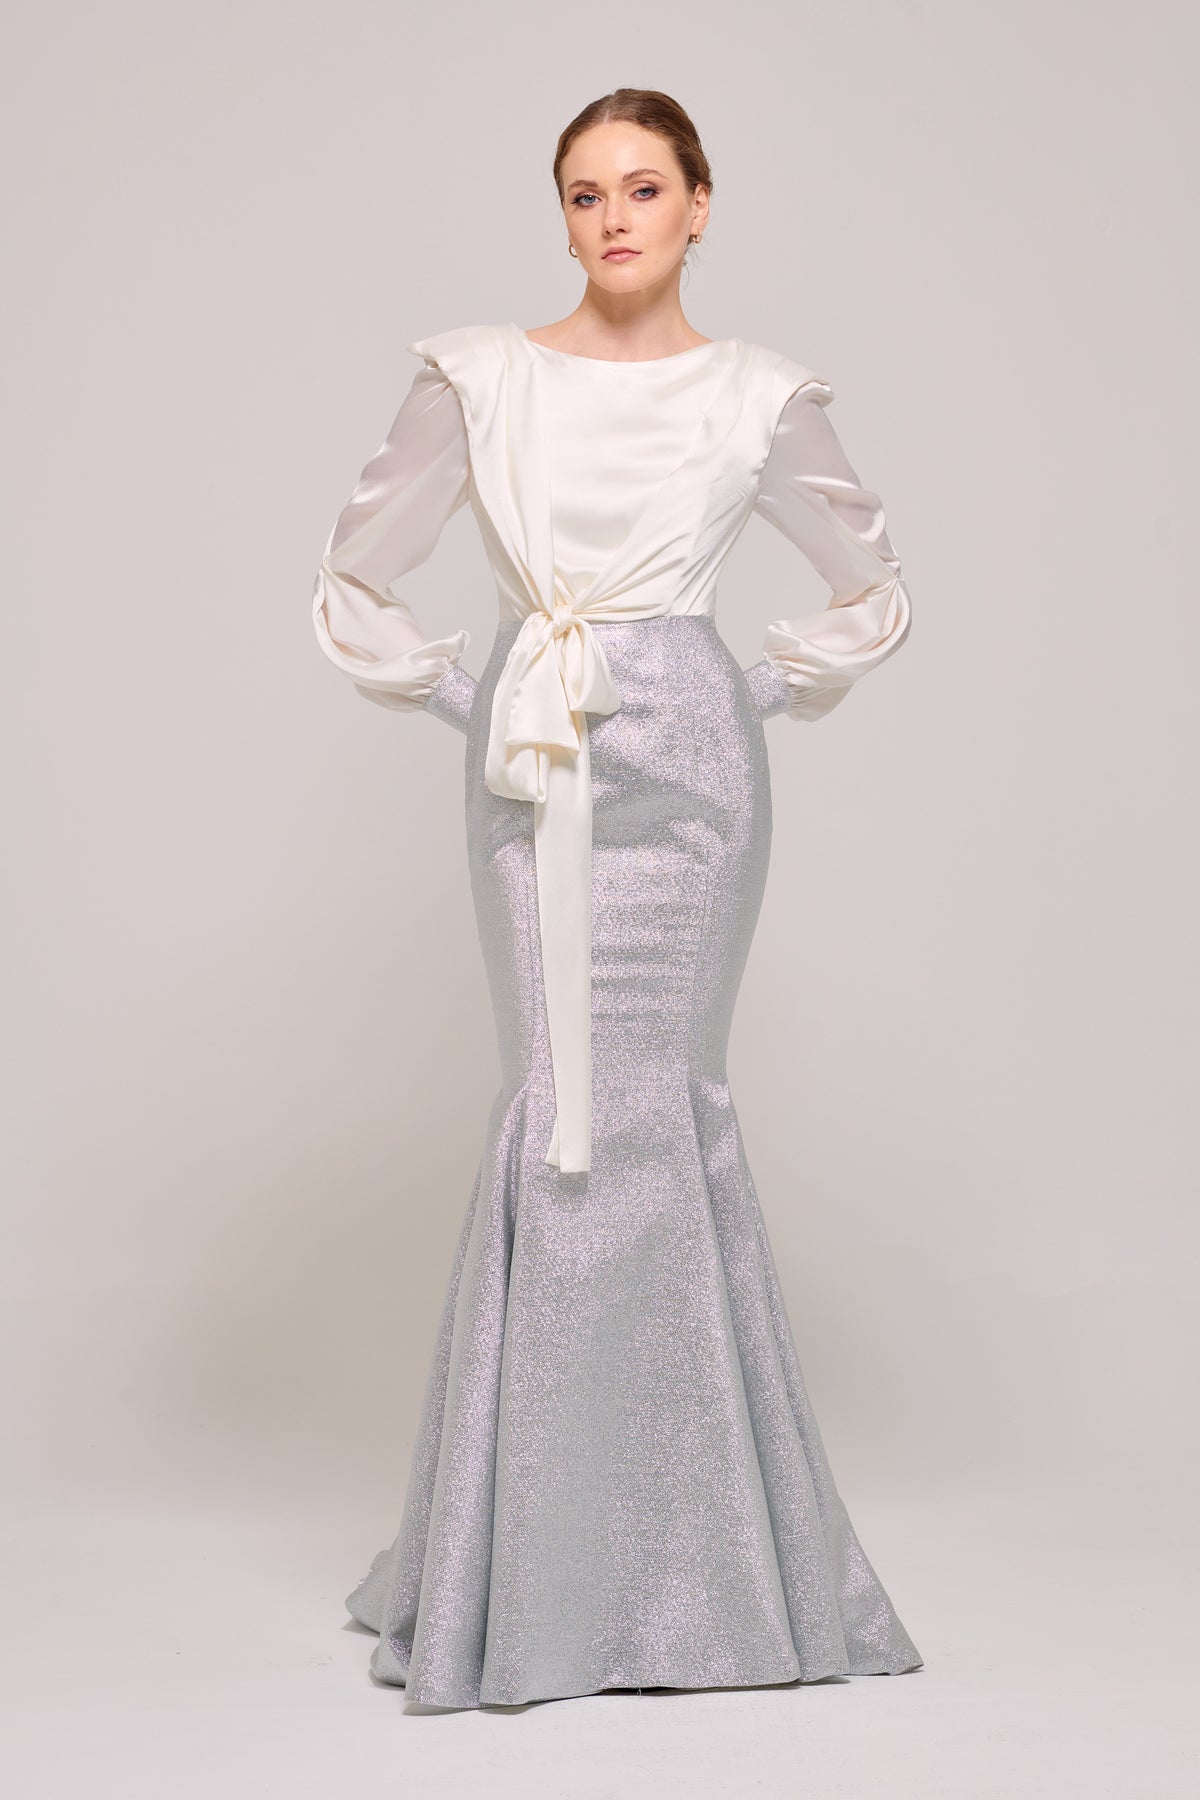 Long Sleeve Cream and Silver Mermaid Gown